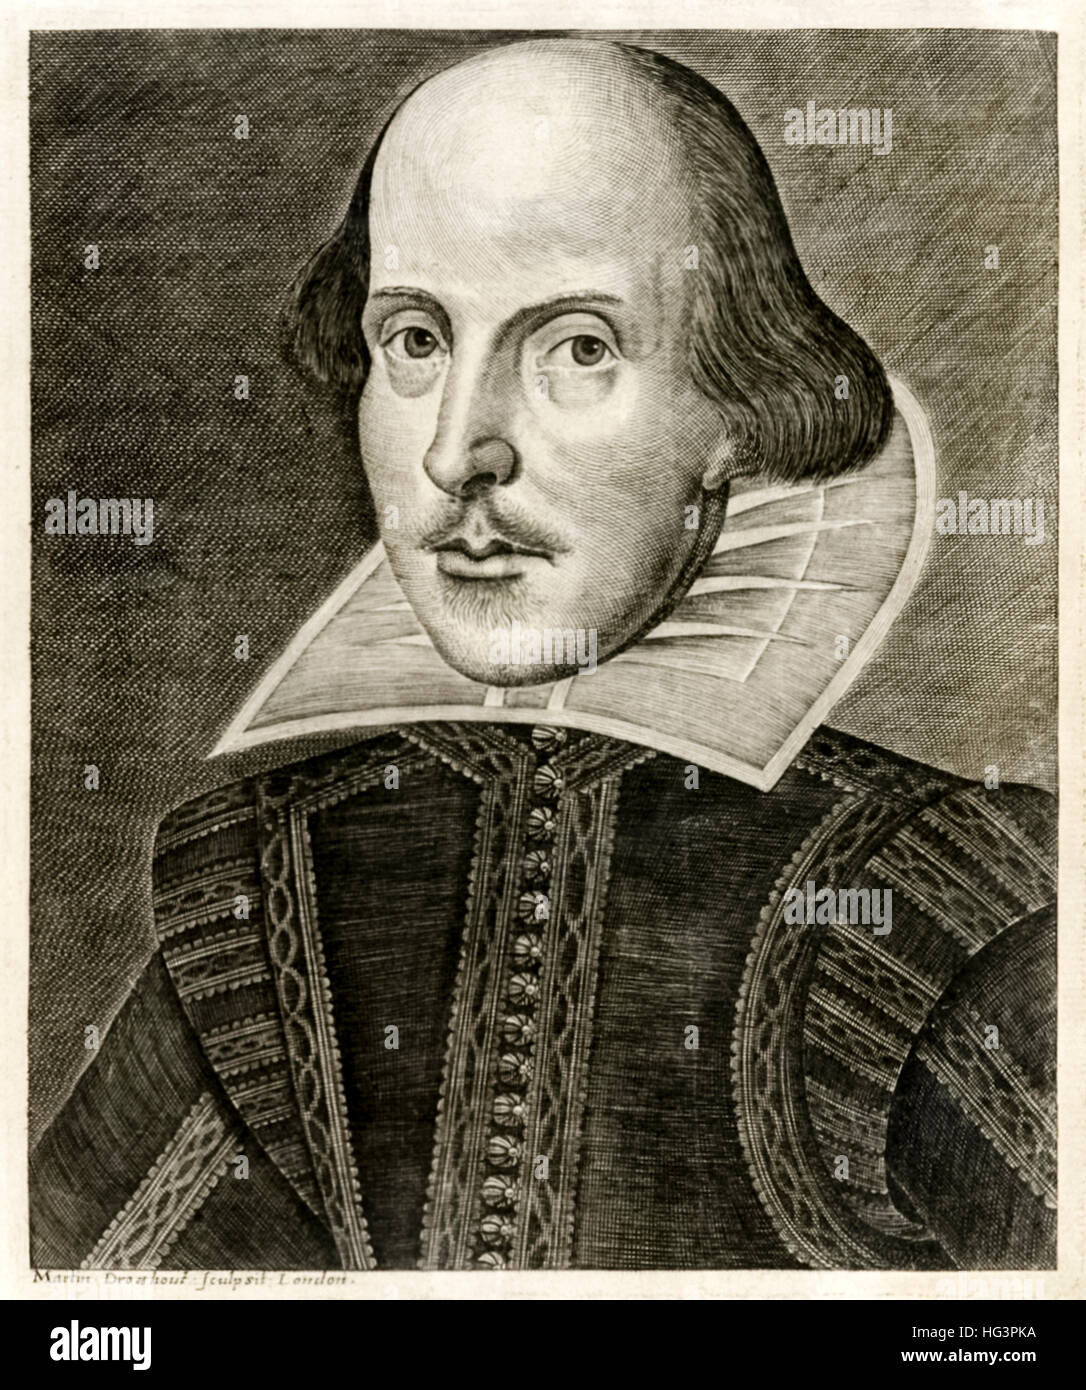 Portrait of William Shakespeare (1564-1616) from the title page of ‘Mr. William Shakespeares comedies, histories, & tragedies’ published in 1623. Copper engraving by Martin Droeshout (1601-1650). Stock Photo